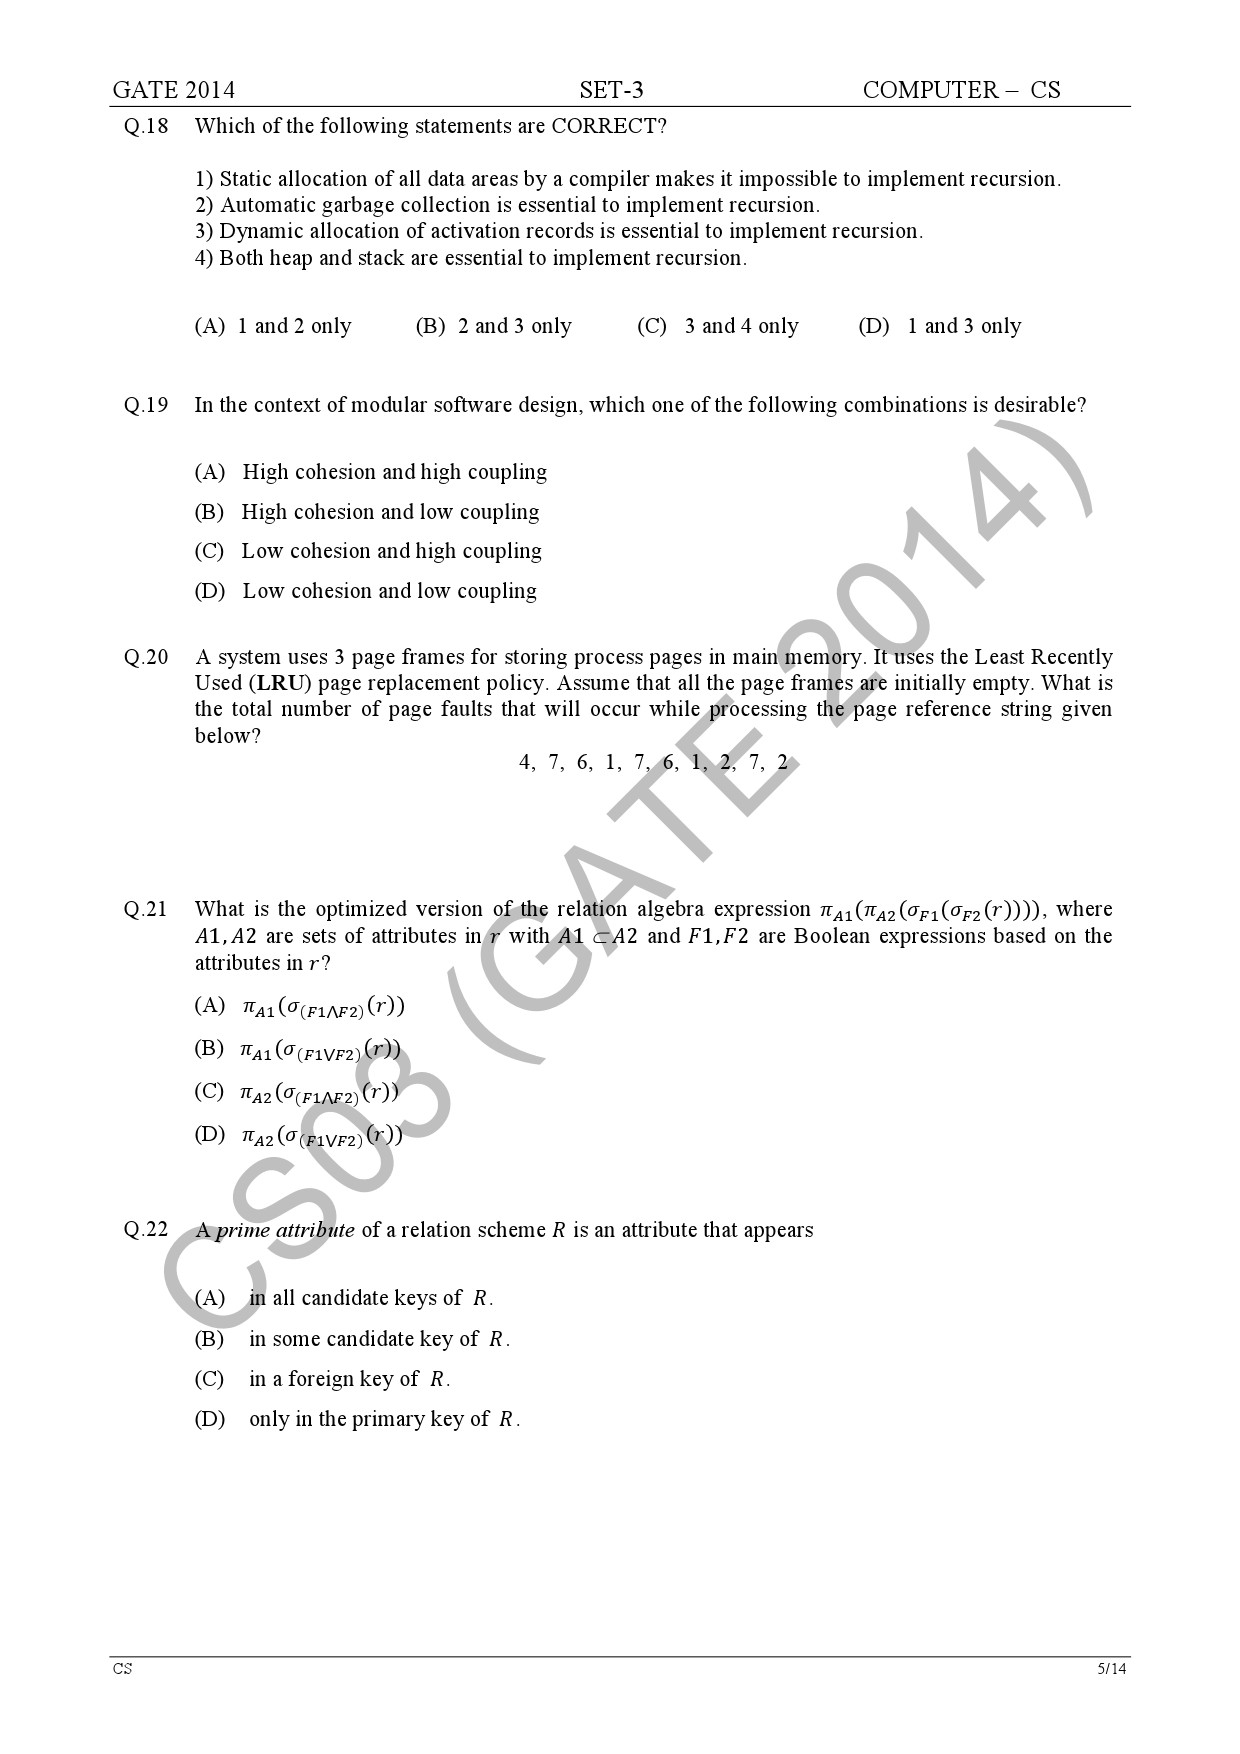 GATE Exam Question Paper 2014 Computer Science and Information Technology Set 3 11